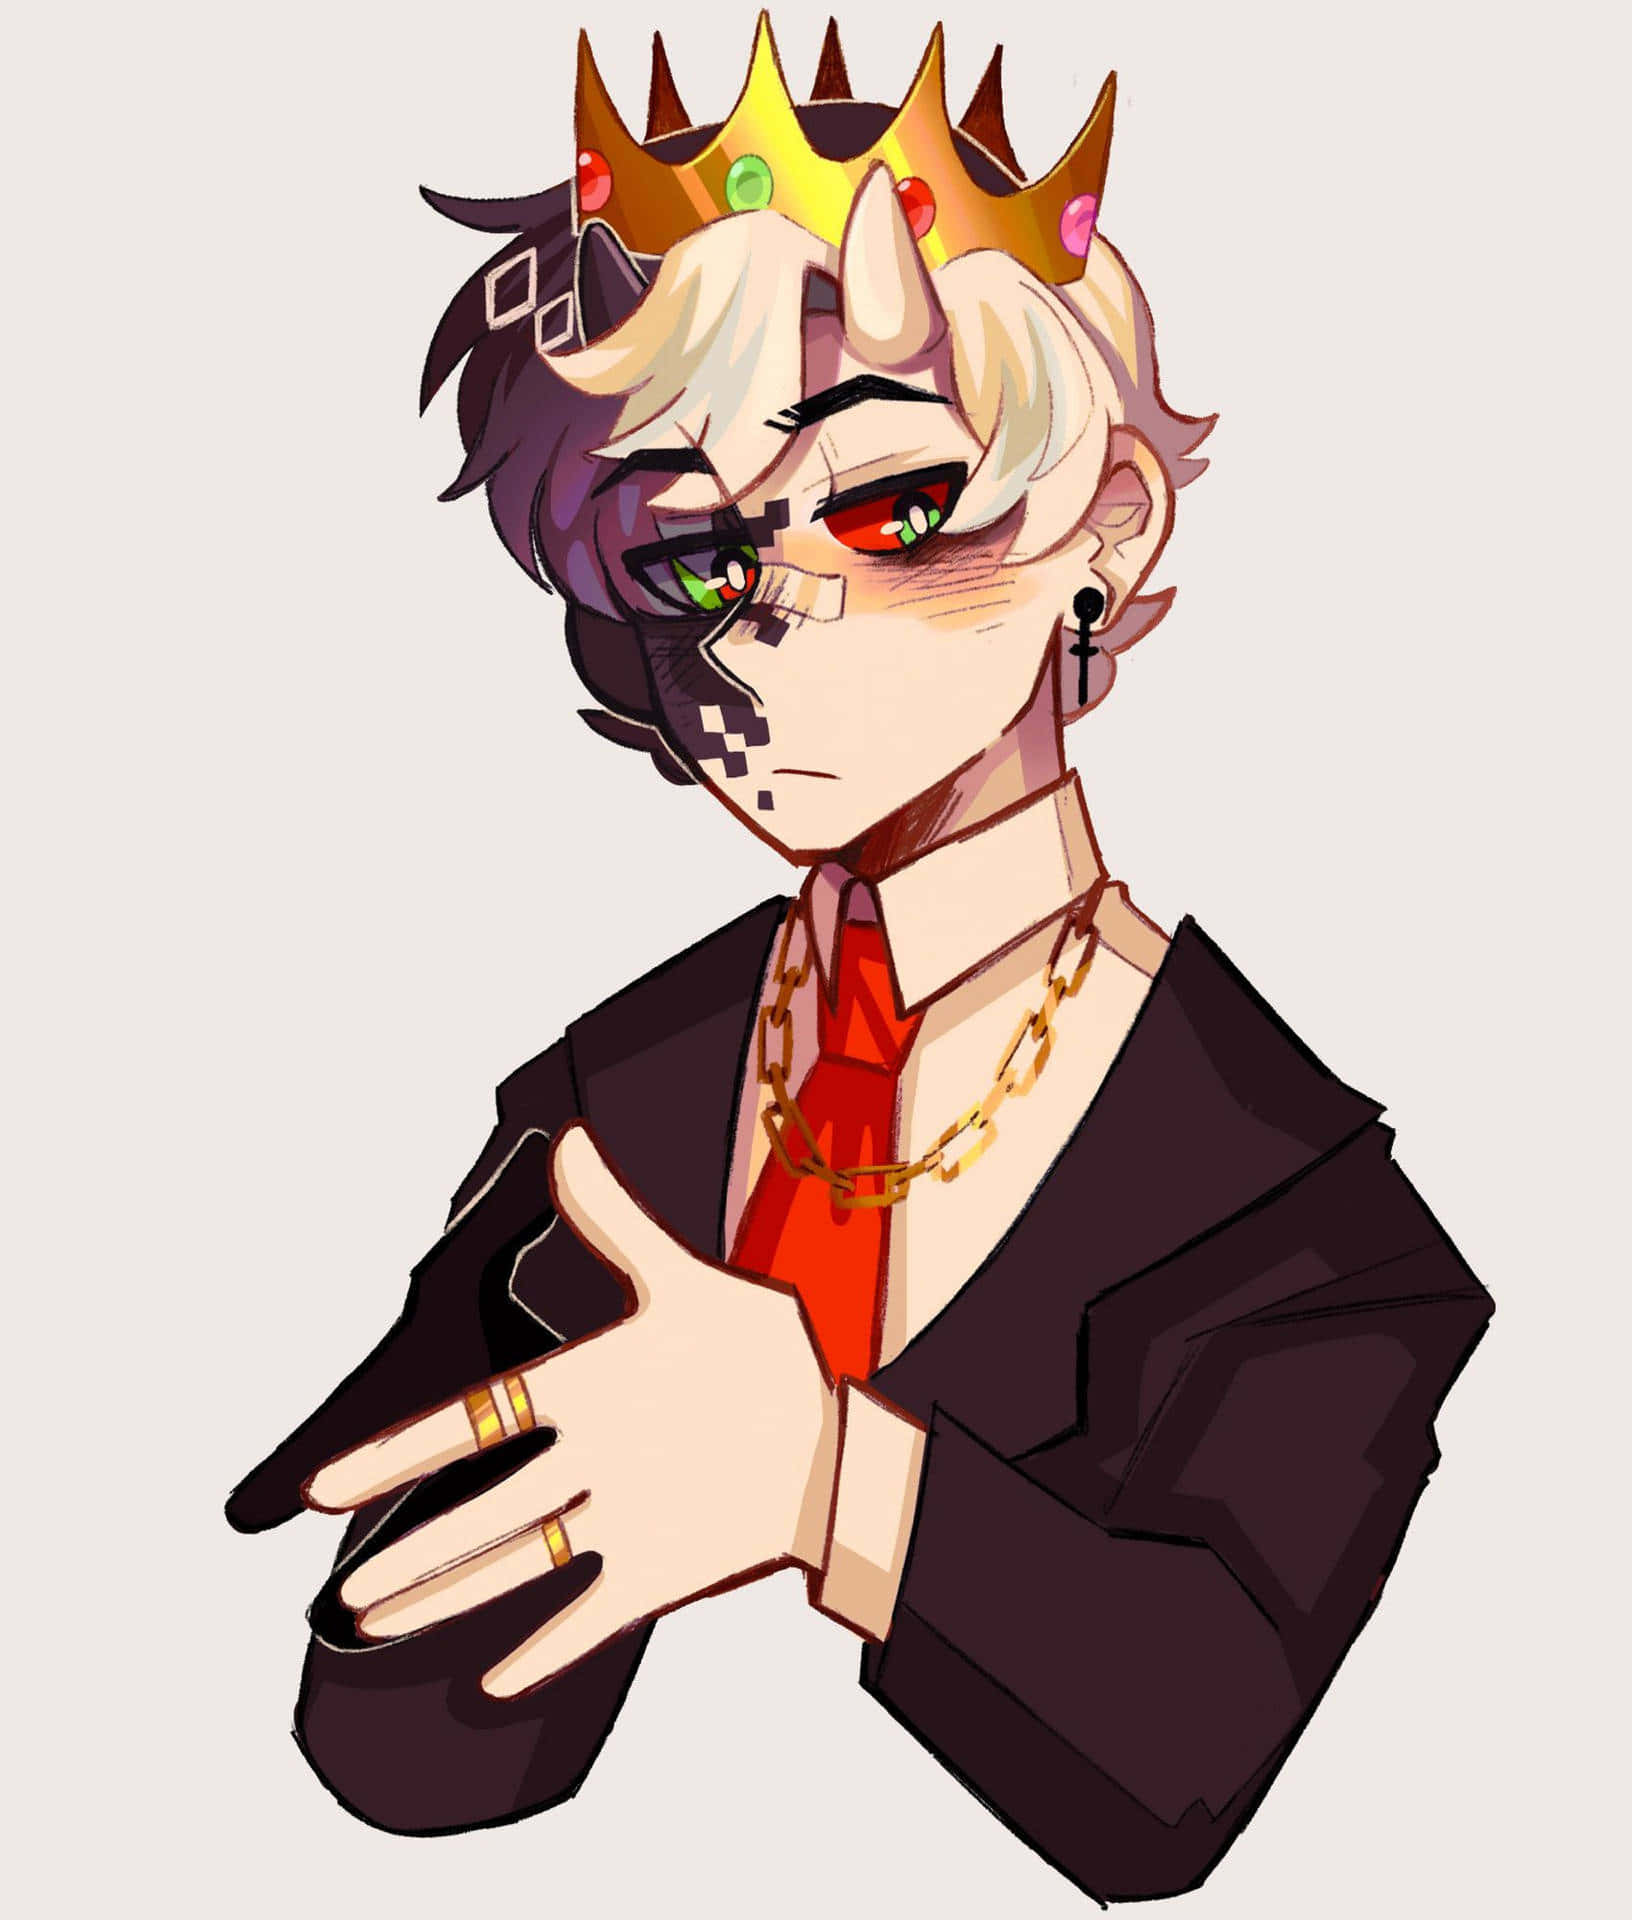 A Cartoon Character Wearing A Crown And Tie